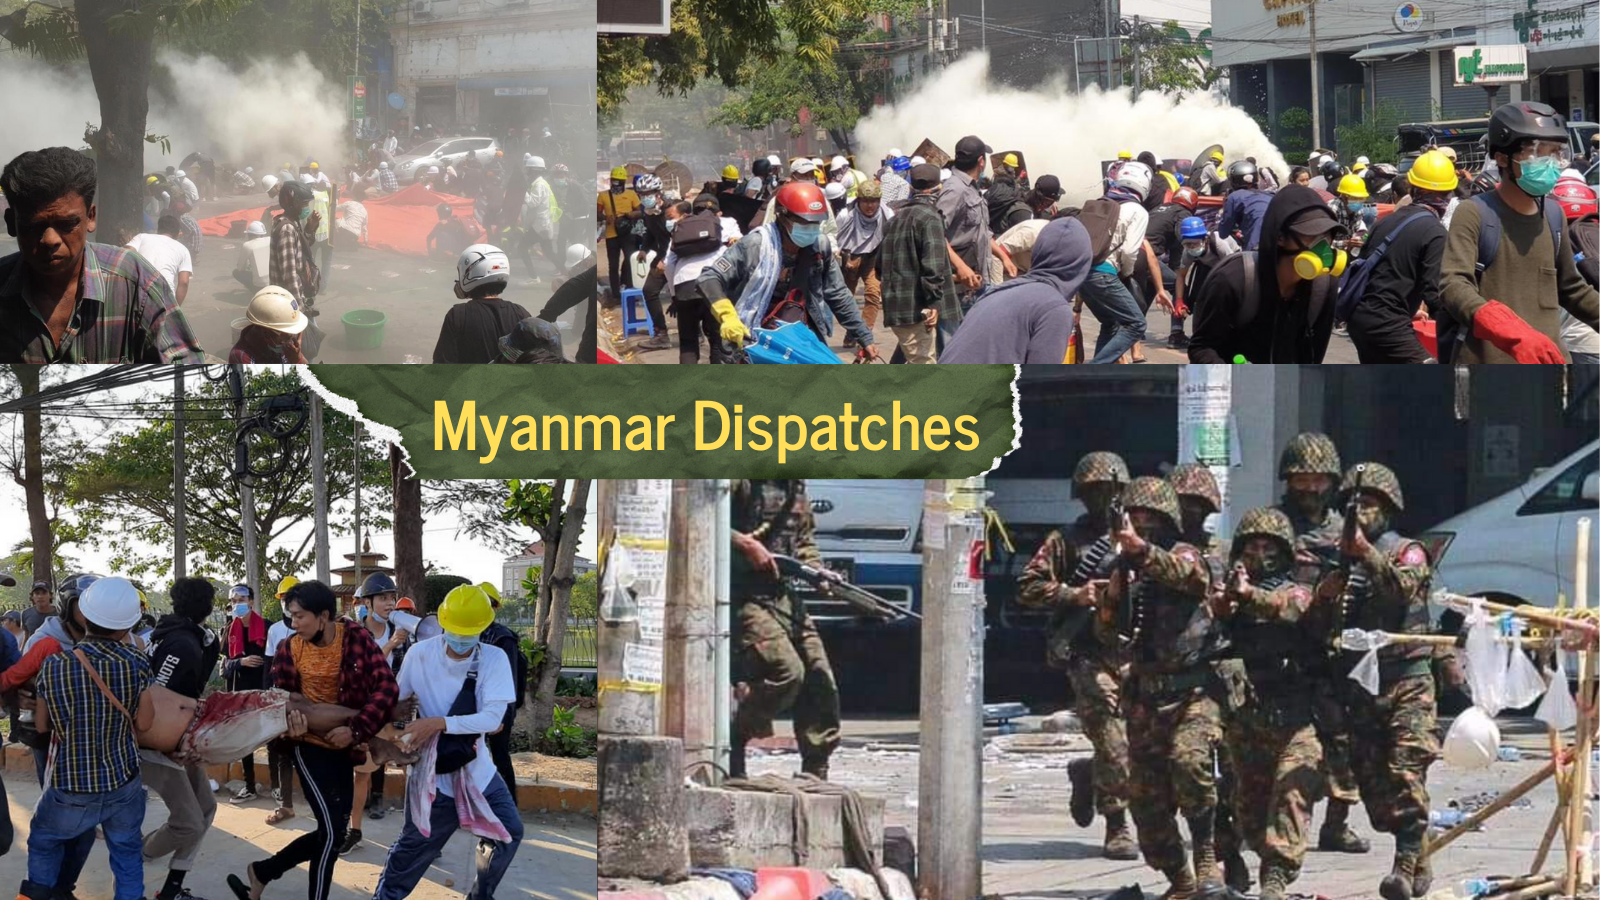 Myanmar dispatches: updates and analysis from JURIST correspondents in Myanmar